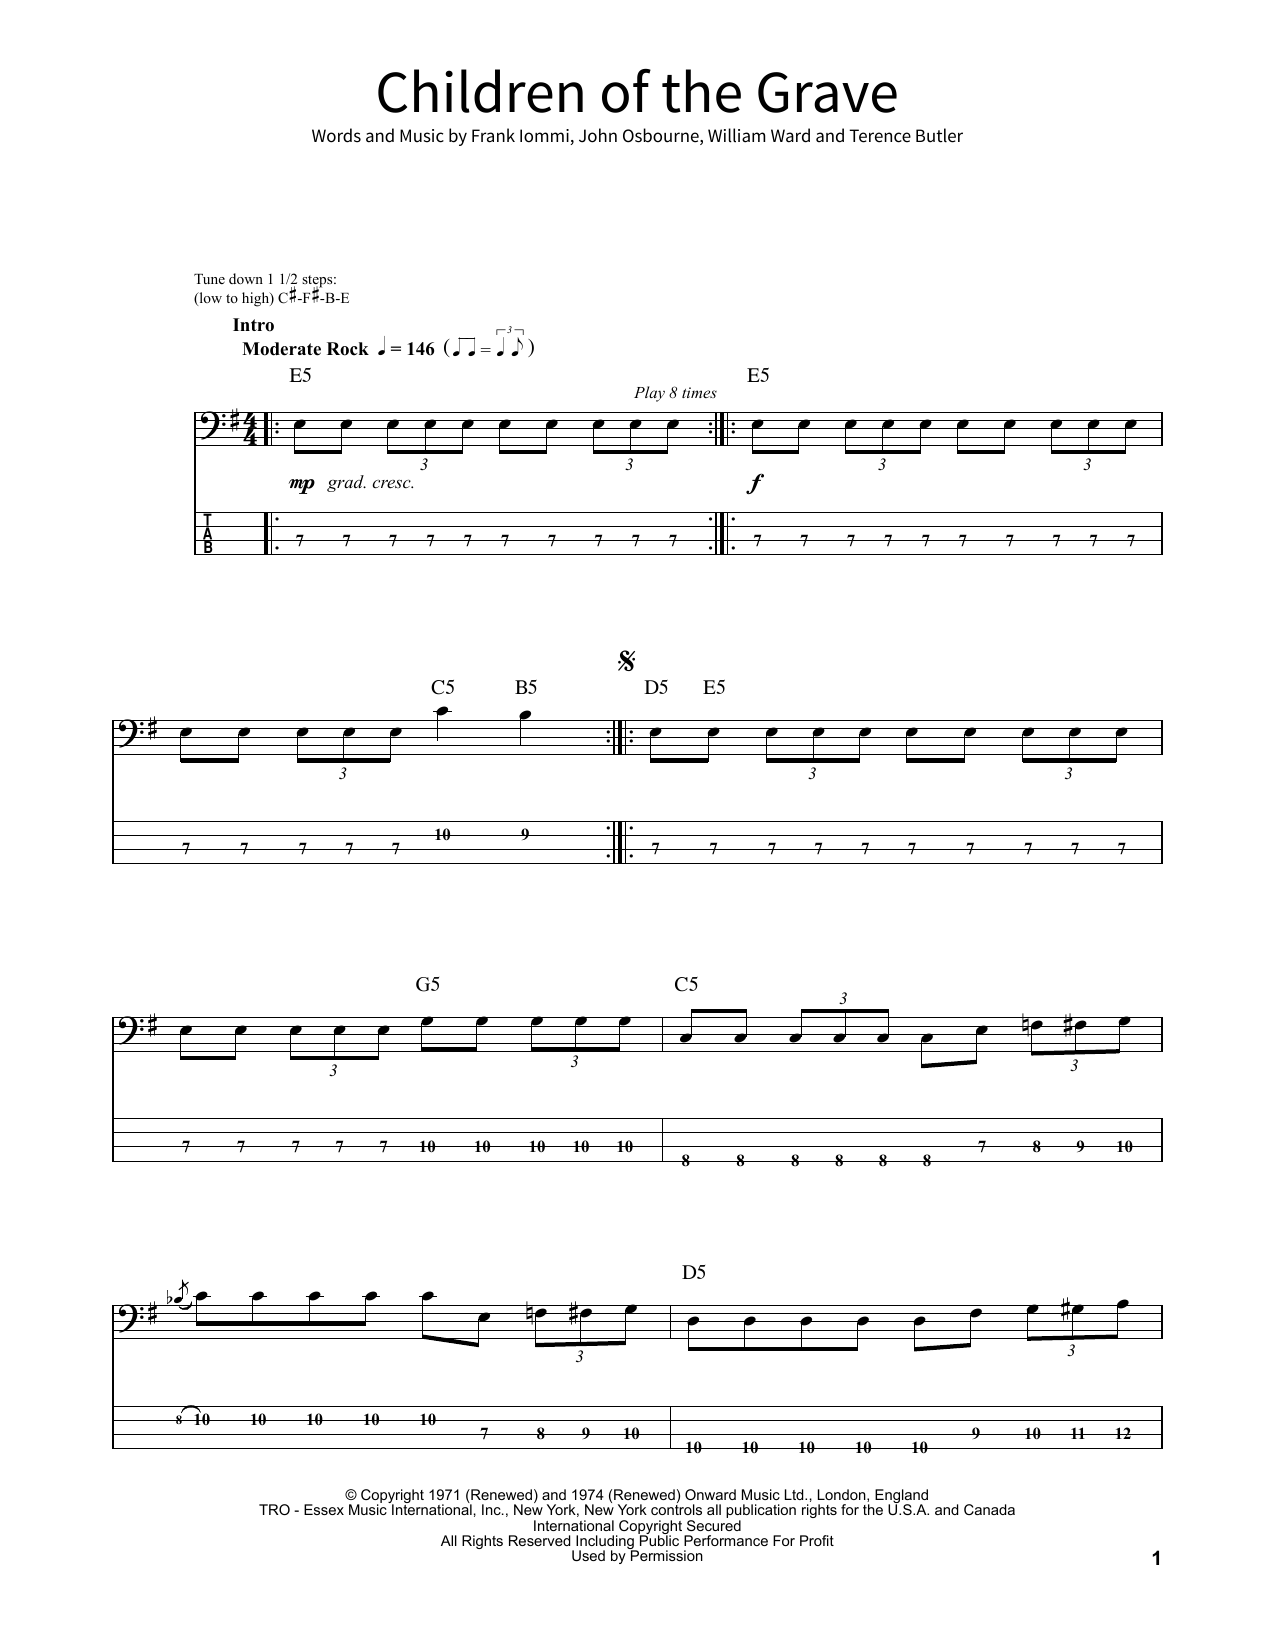 Black Sabbath Children Of The Grave sheet music notes and chords. Download Printable PDF.